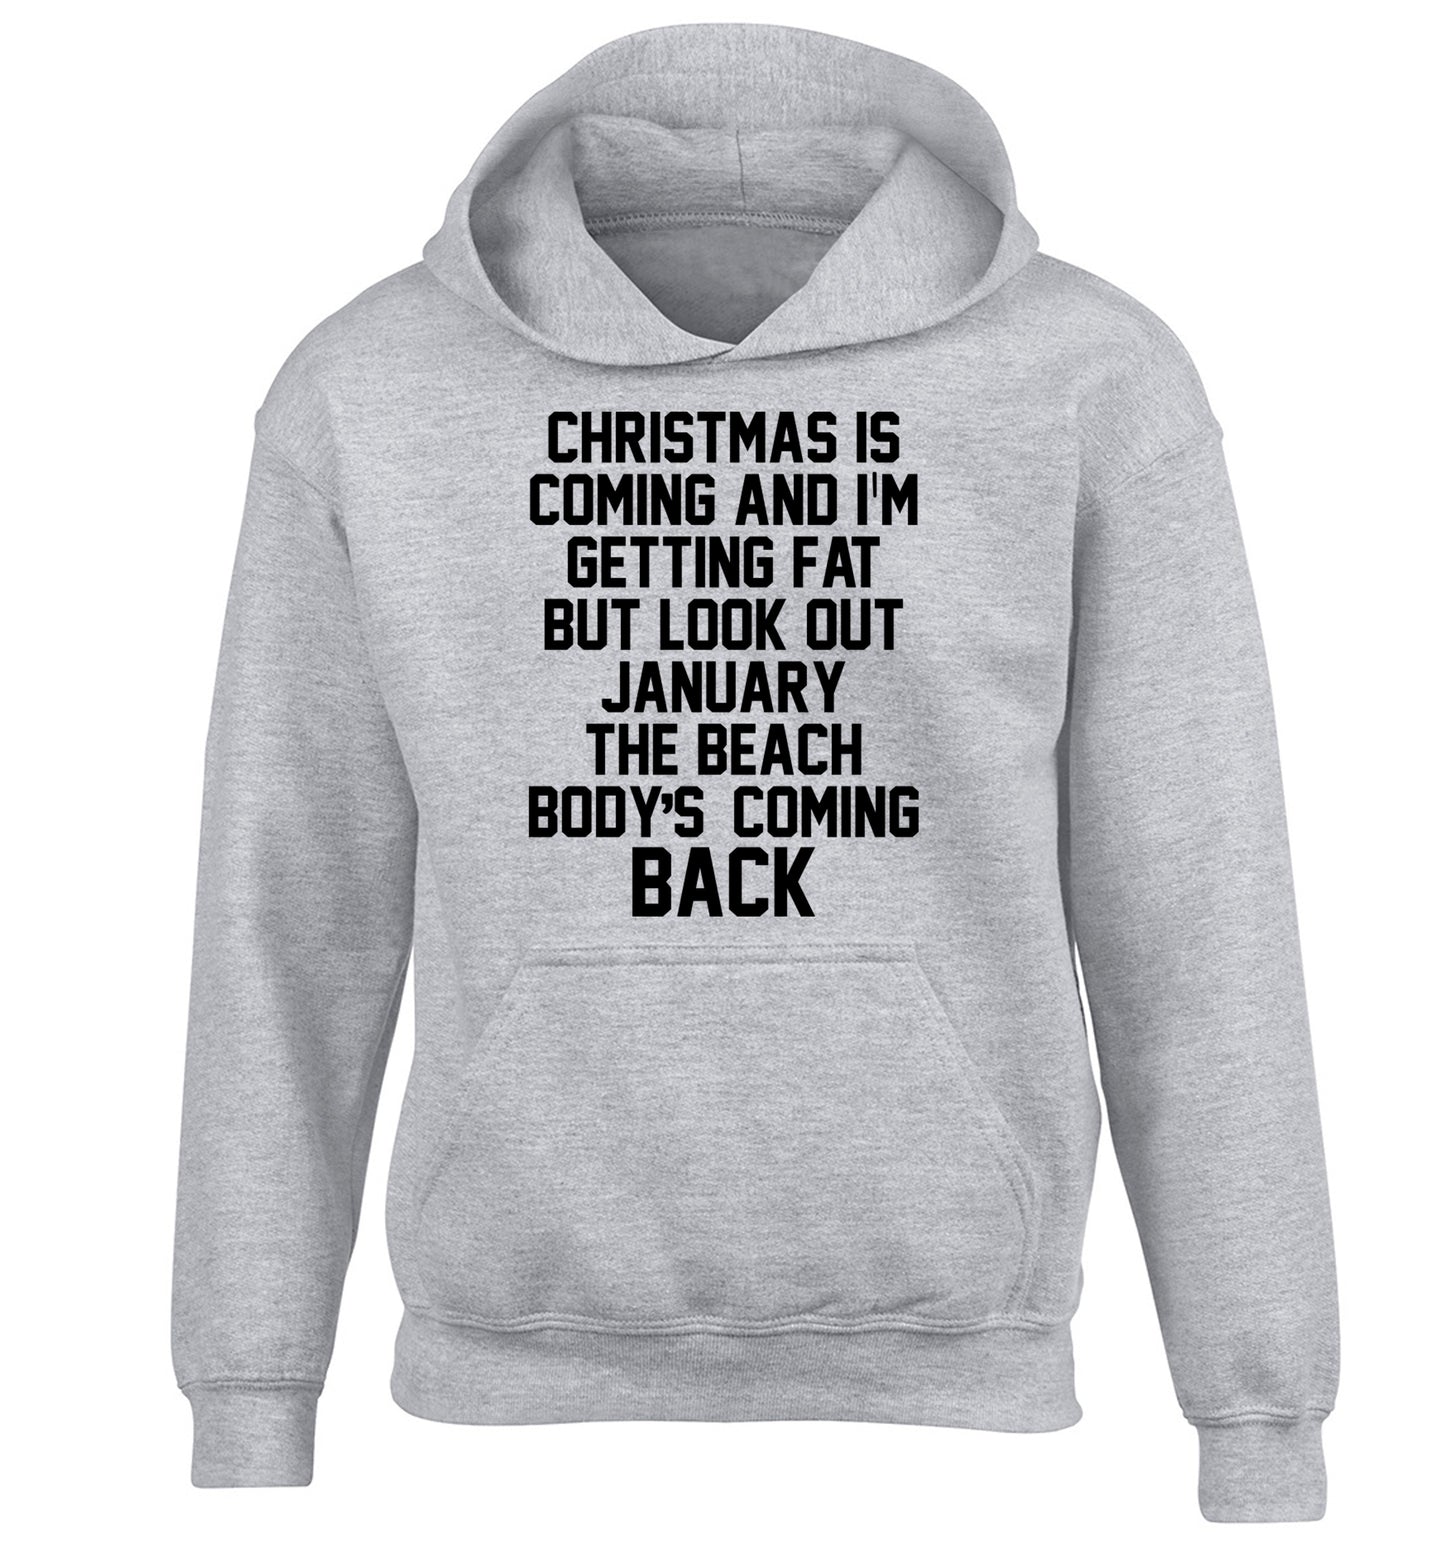 Christmas is coming and I'm getting fat but look out January the beach body's coming back! children's grey hoodie 12-14 Years